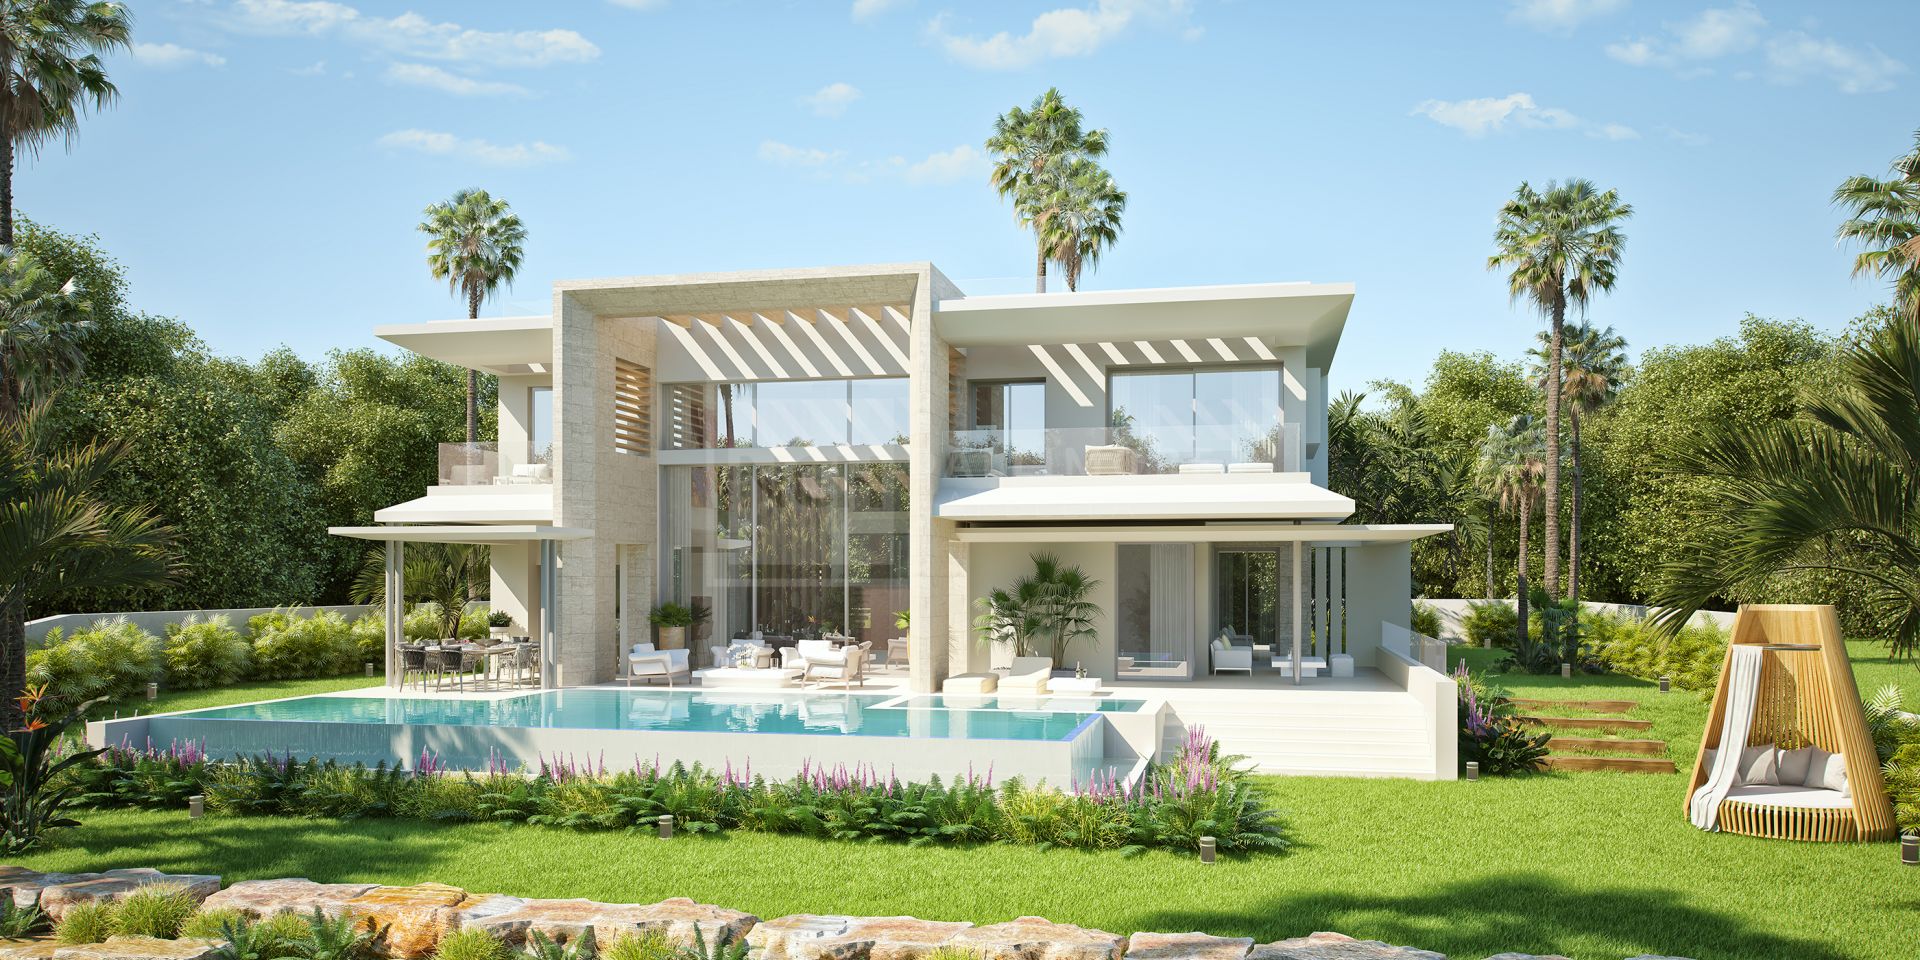 THE GALLERY VILLAS - LUXURY LIVING WIT THE MOST SPECTACULAR VIEWS